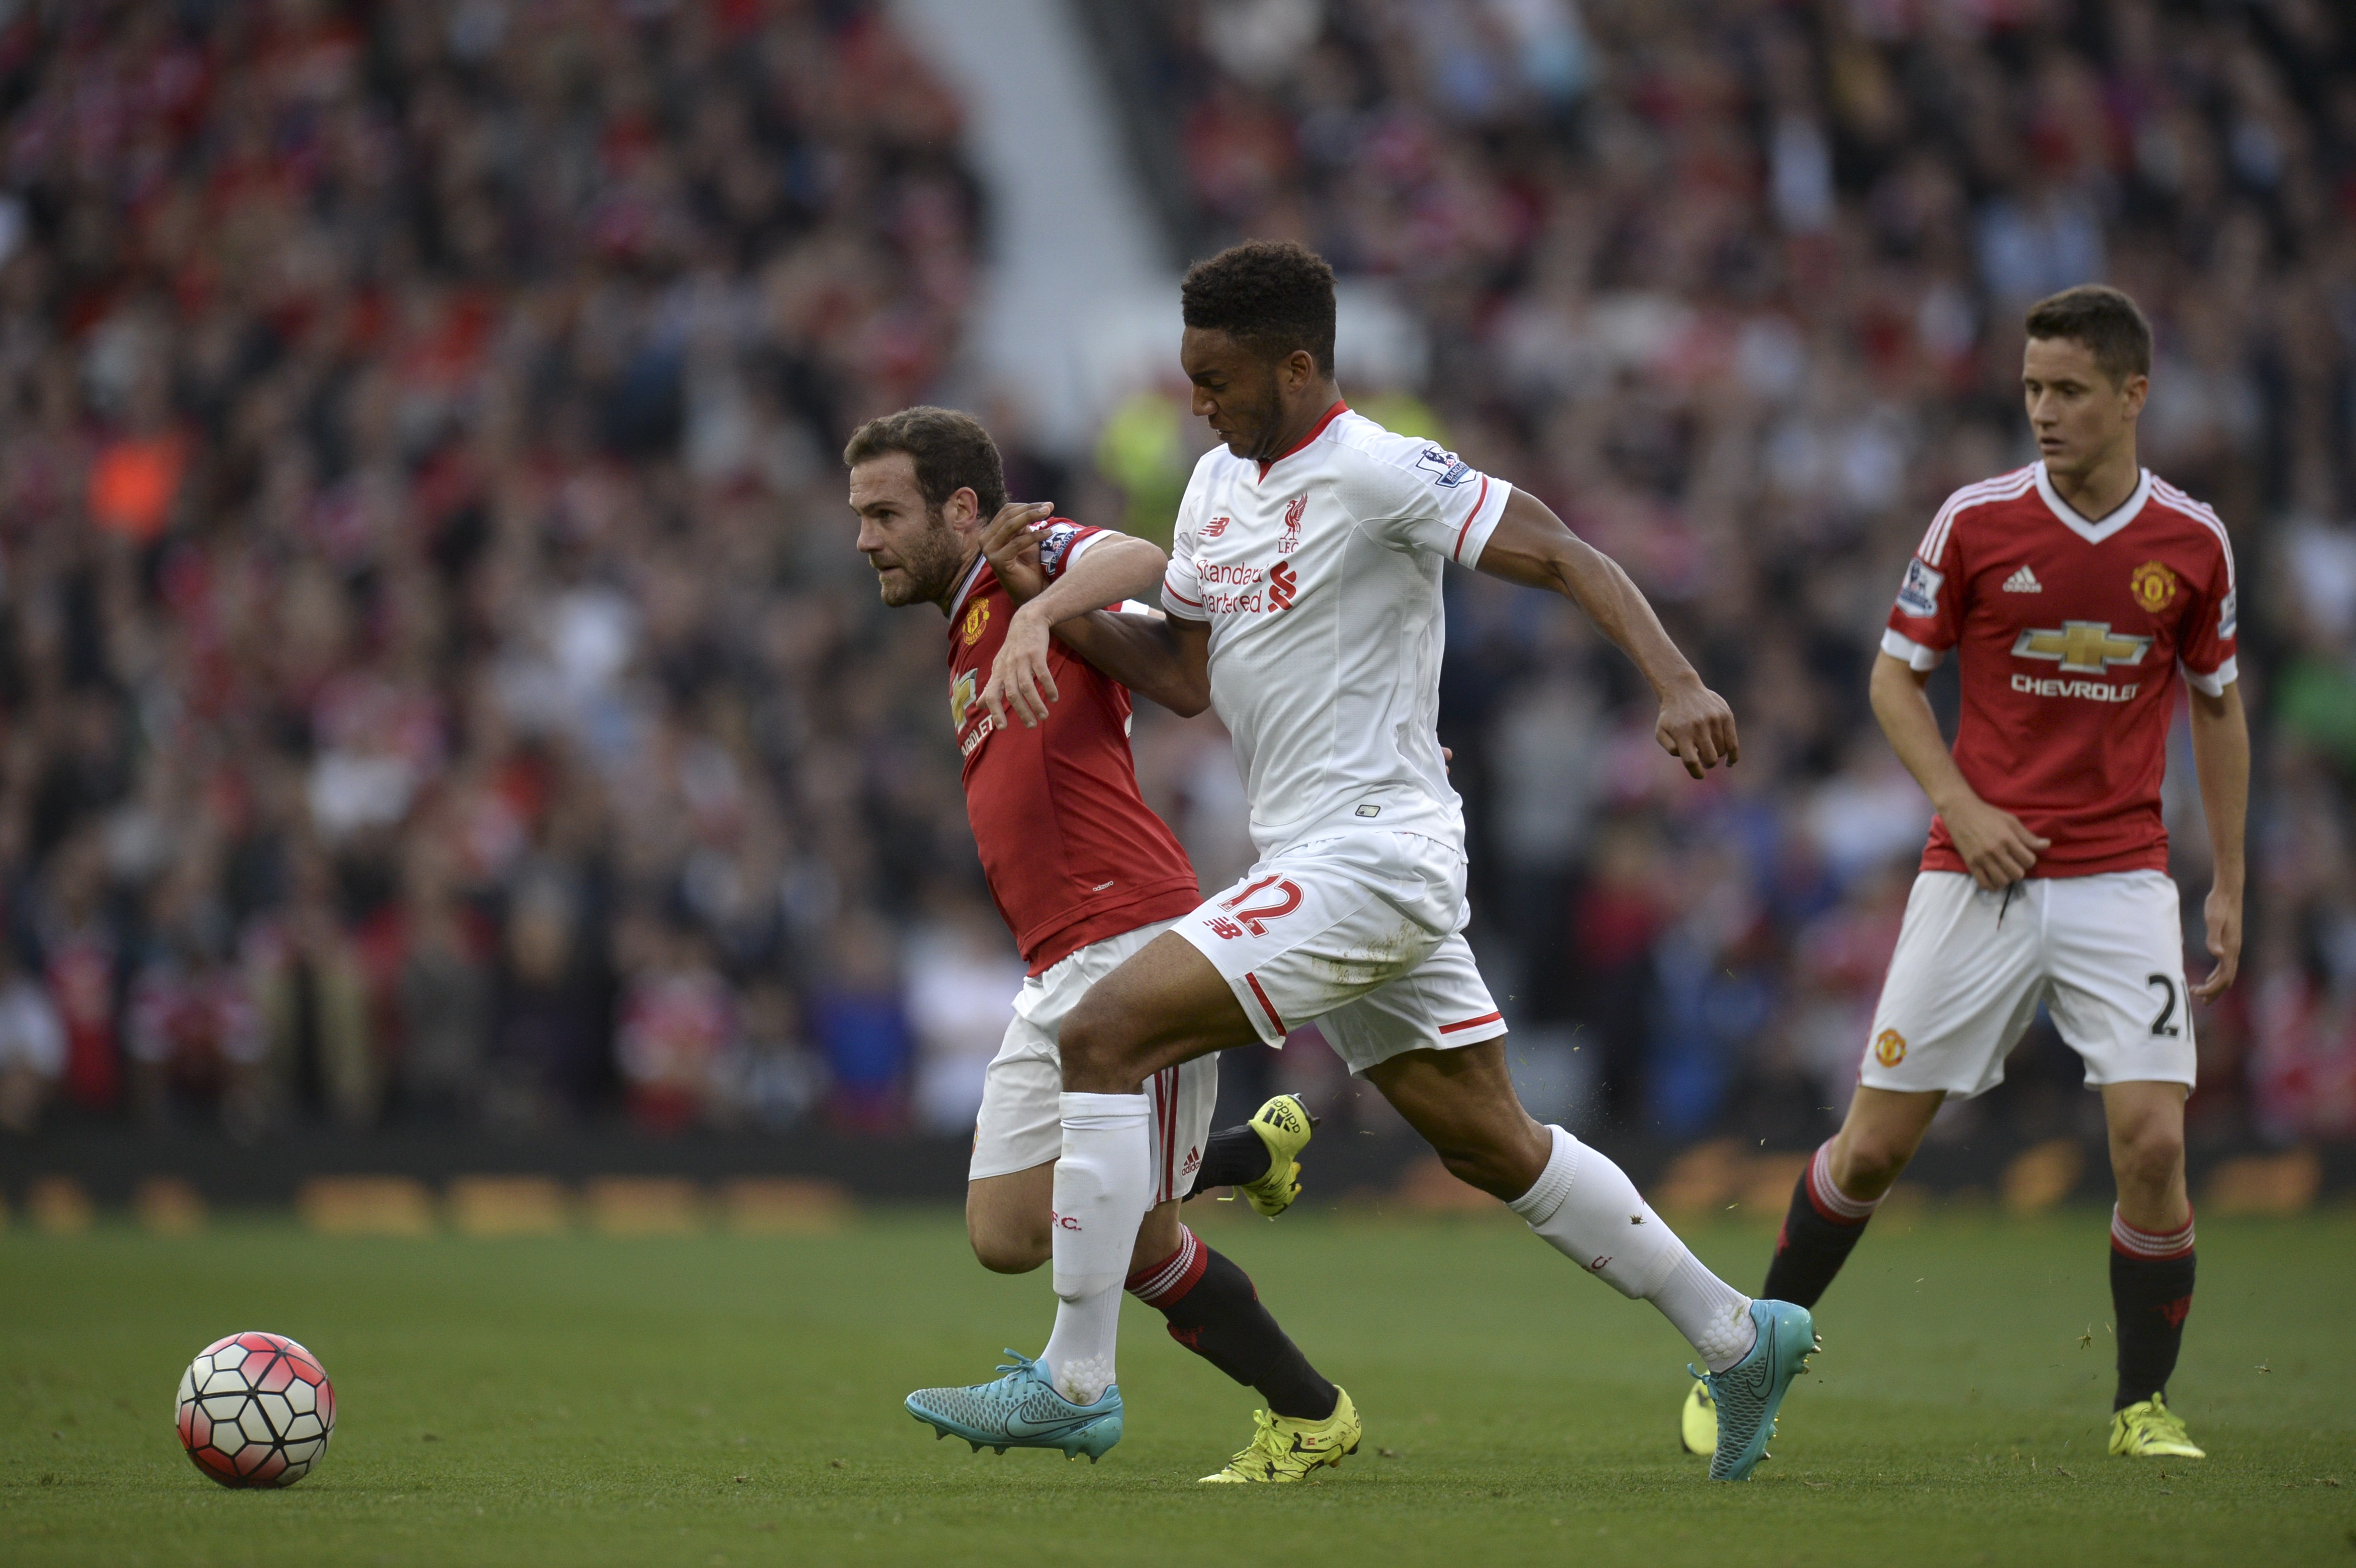 Manchester United's Spanish midfielder Juan Mata (L) vies with Liverpool's English defender Joe Gomez (C) during the English Premier League football match between Manchester United and Liverpool at Old Trafford in Manchester, north west England, on September 12, 2015. AFP PHOTO / OLI SCARFF

RESTRICTED TO EDITORIAL USE. No use with unauthorized audio, video, data, fixture lists, club/league logos or 'live' services. Online in-match use limited to 75 images, no video emulation. No use in betting, games or single club/league/player publications.        (Photo credit should read OLI SCARFF/AFP/Getty Images)